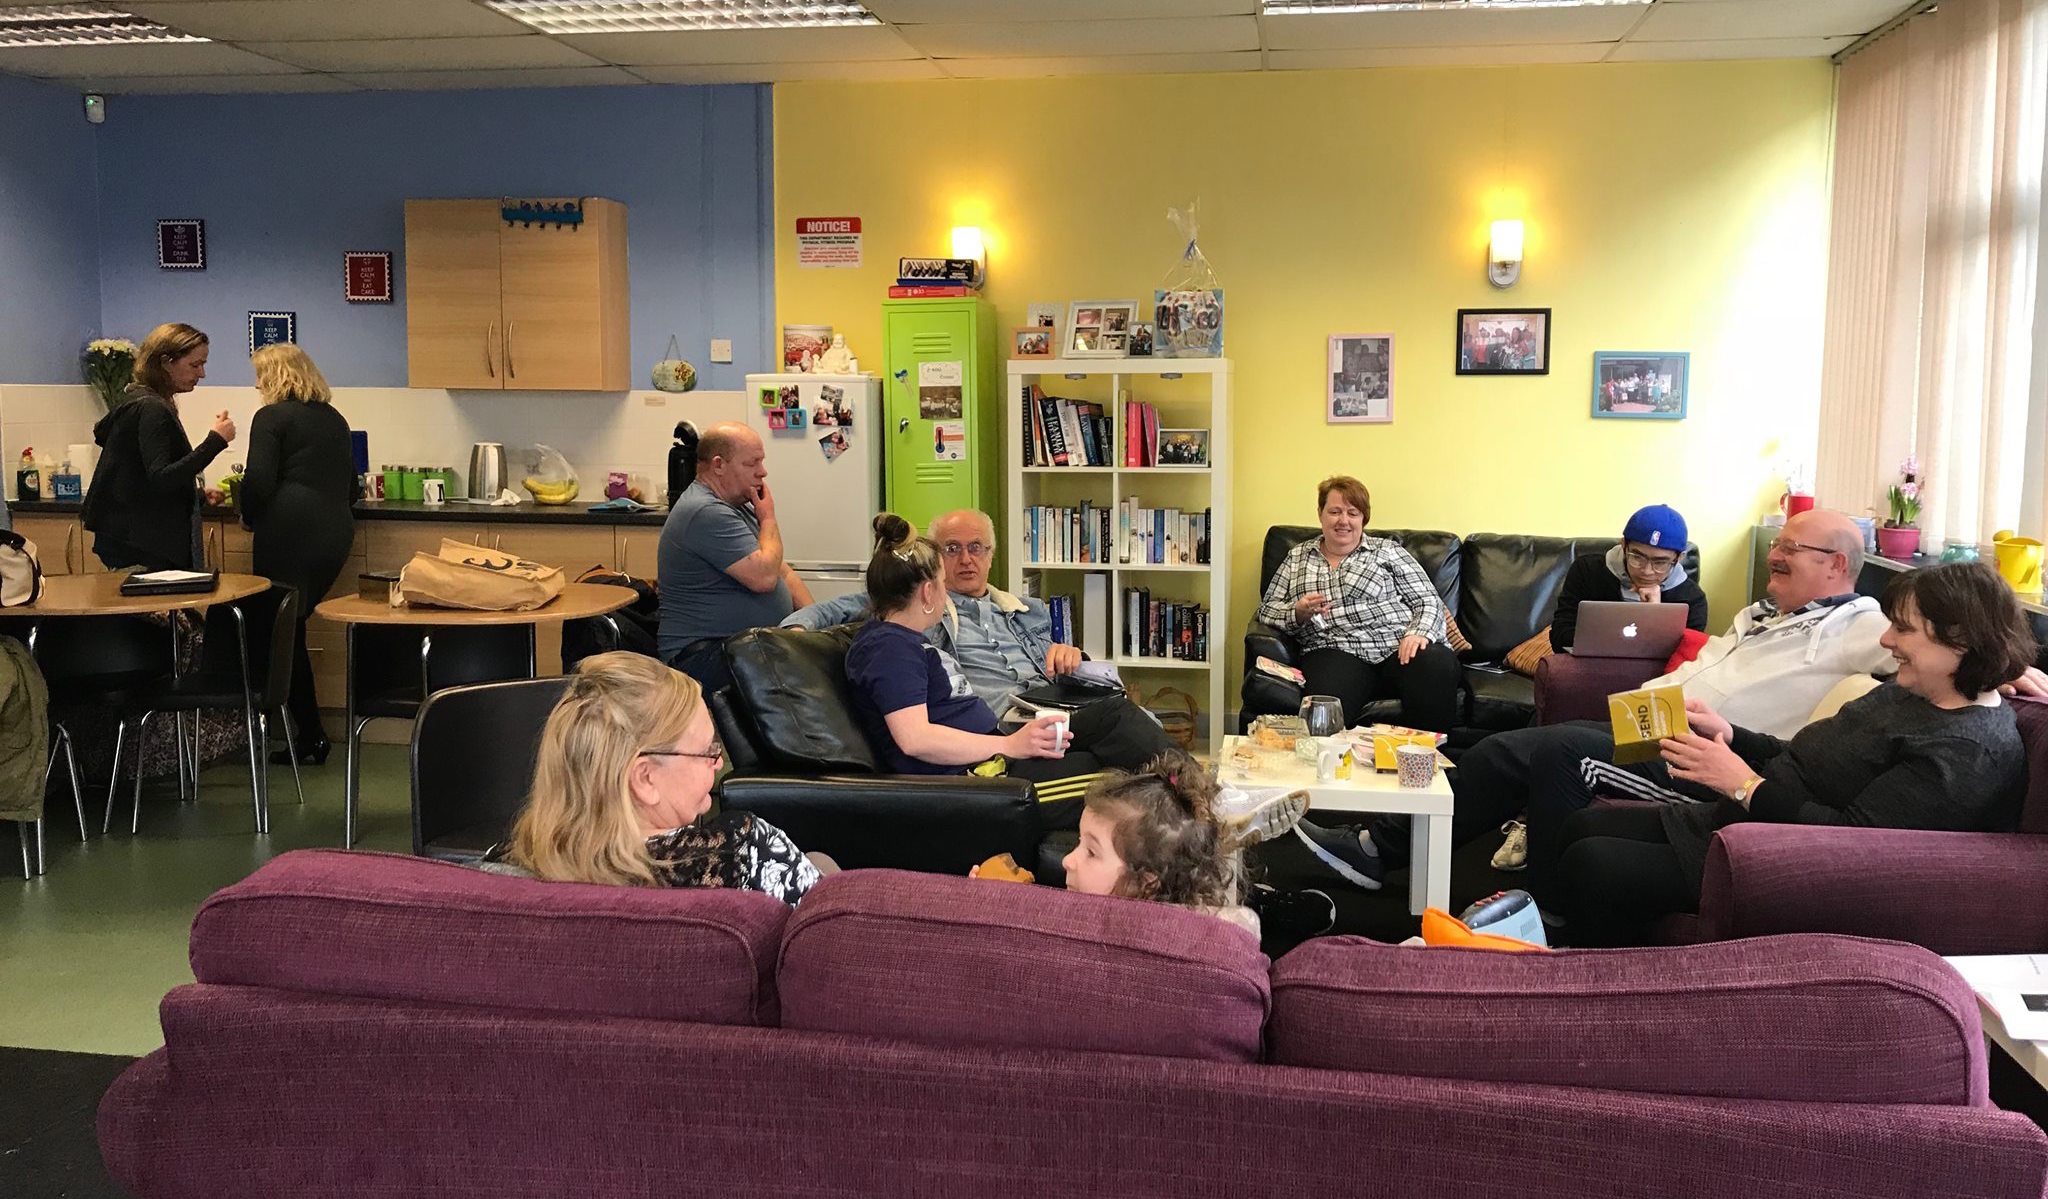 A group of parent-carers chatting and having a good time in Lifted carers' centre